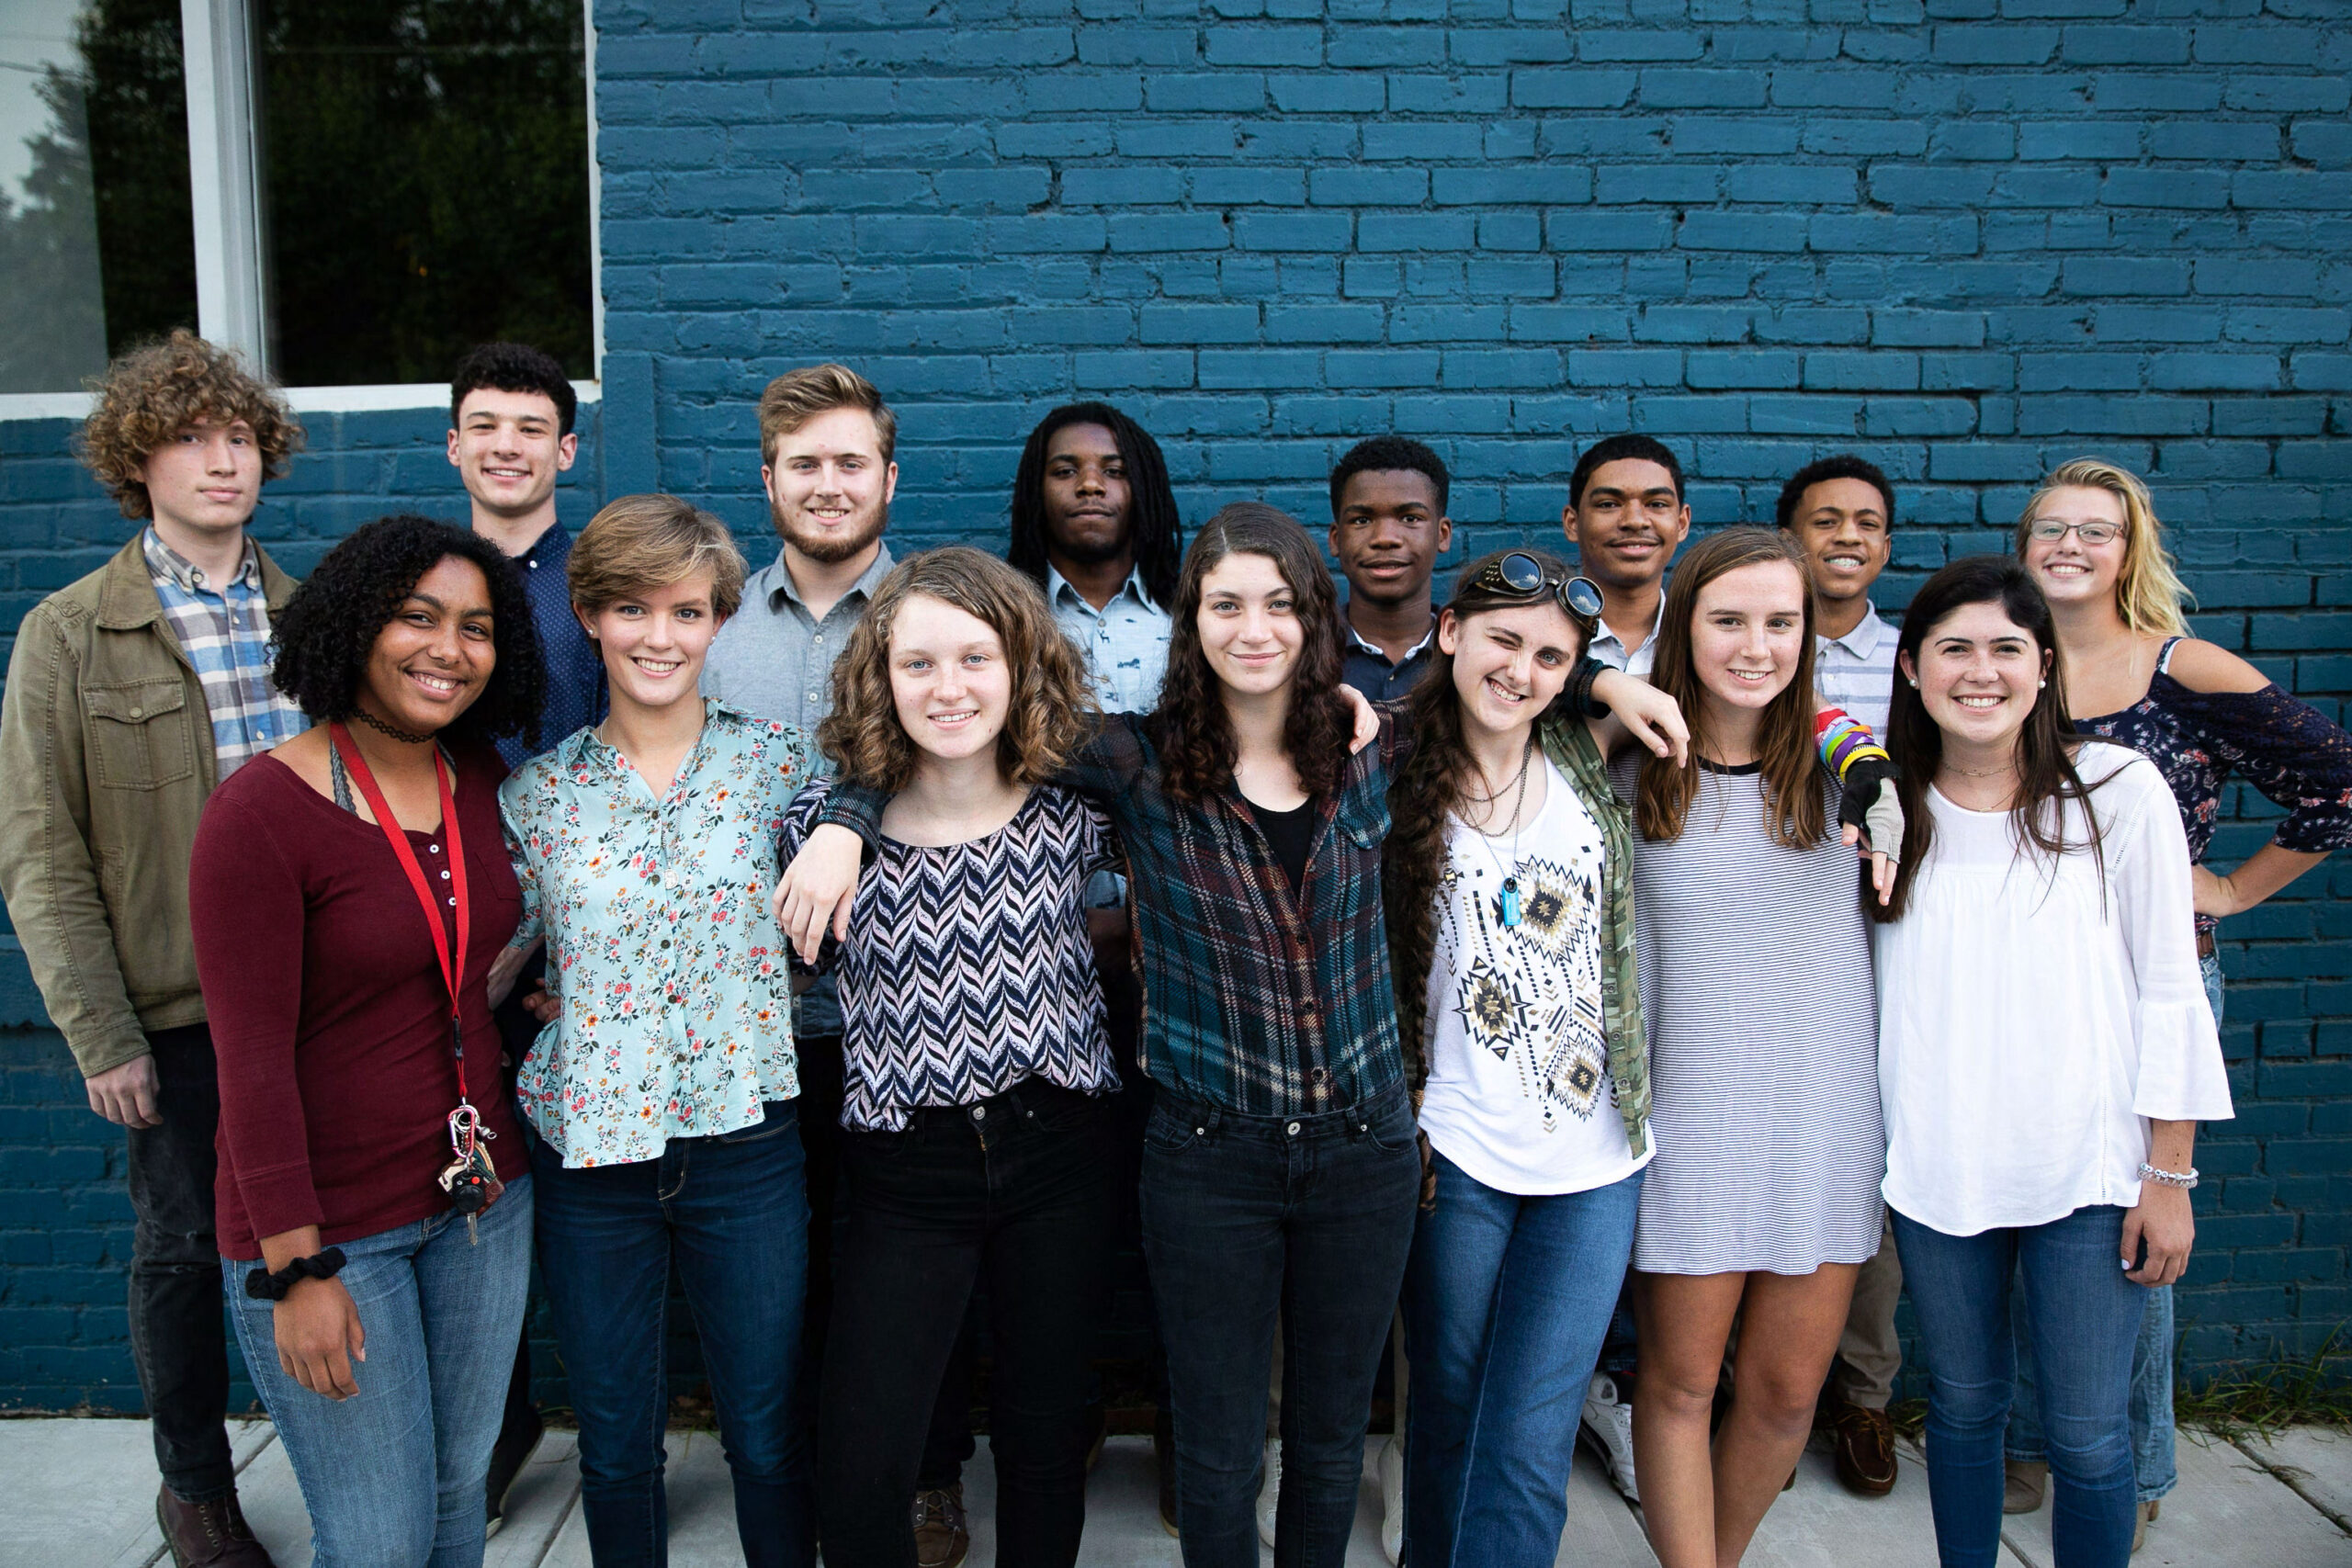 District C students smiling brightly and standing in front of a blue brick wall.